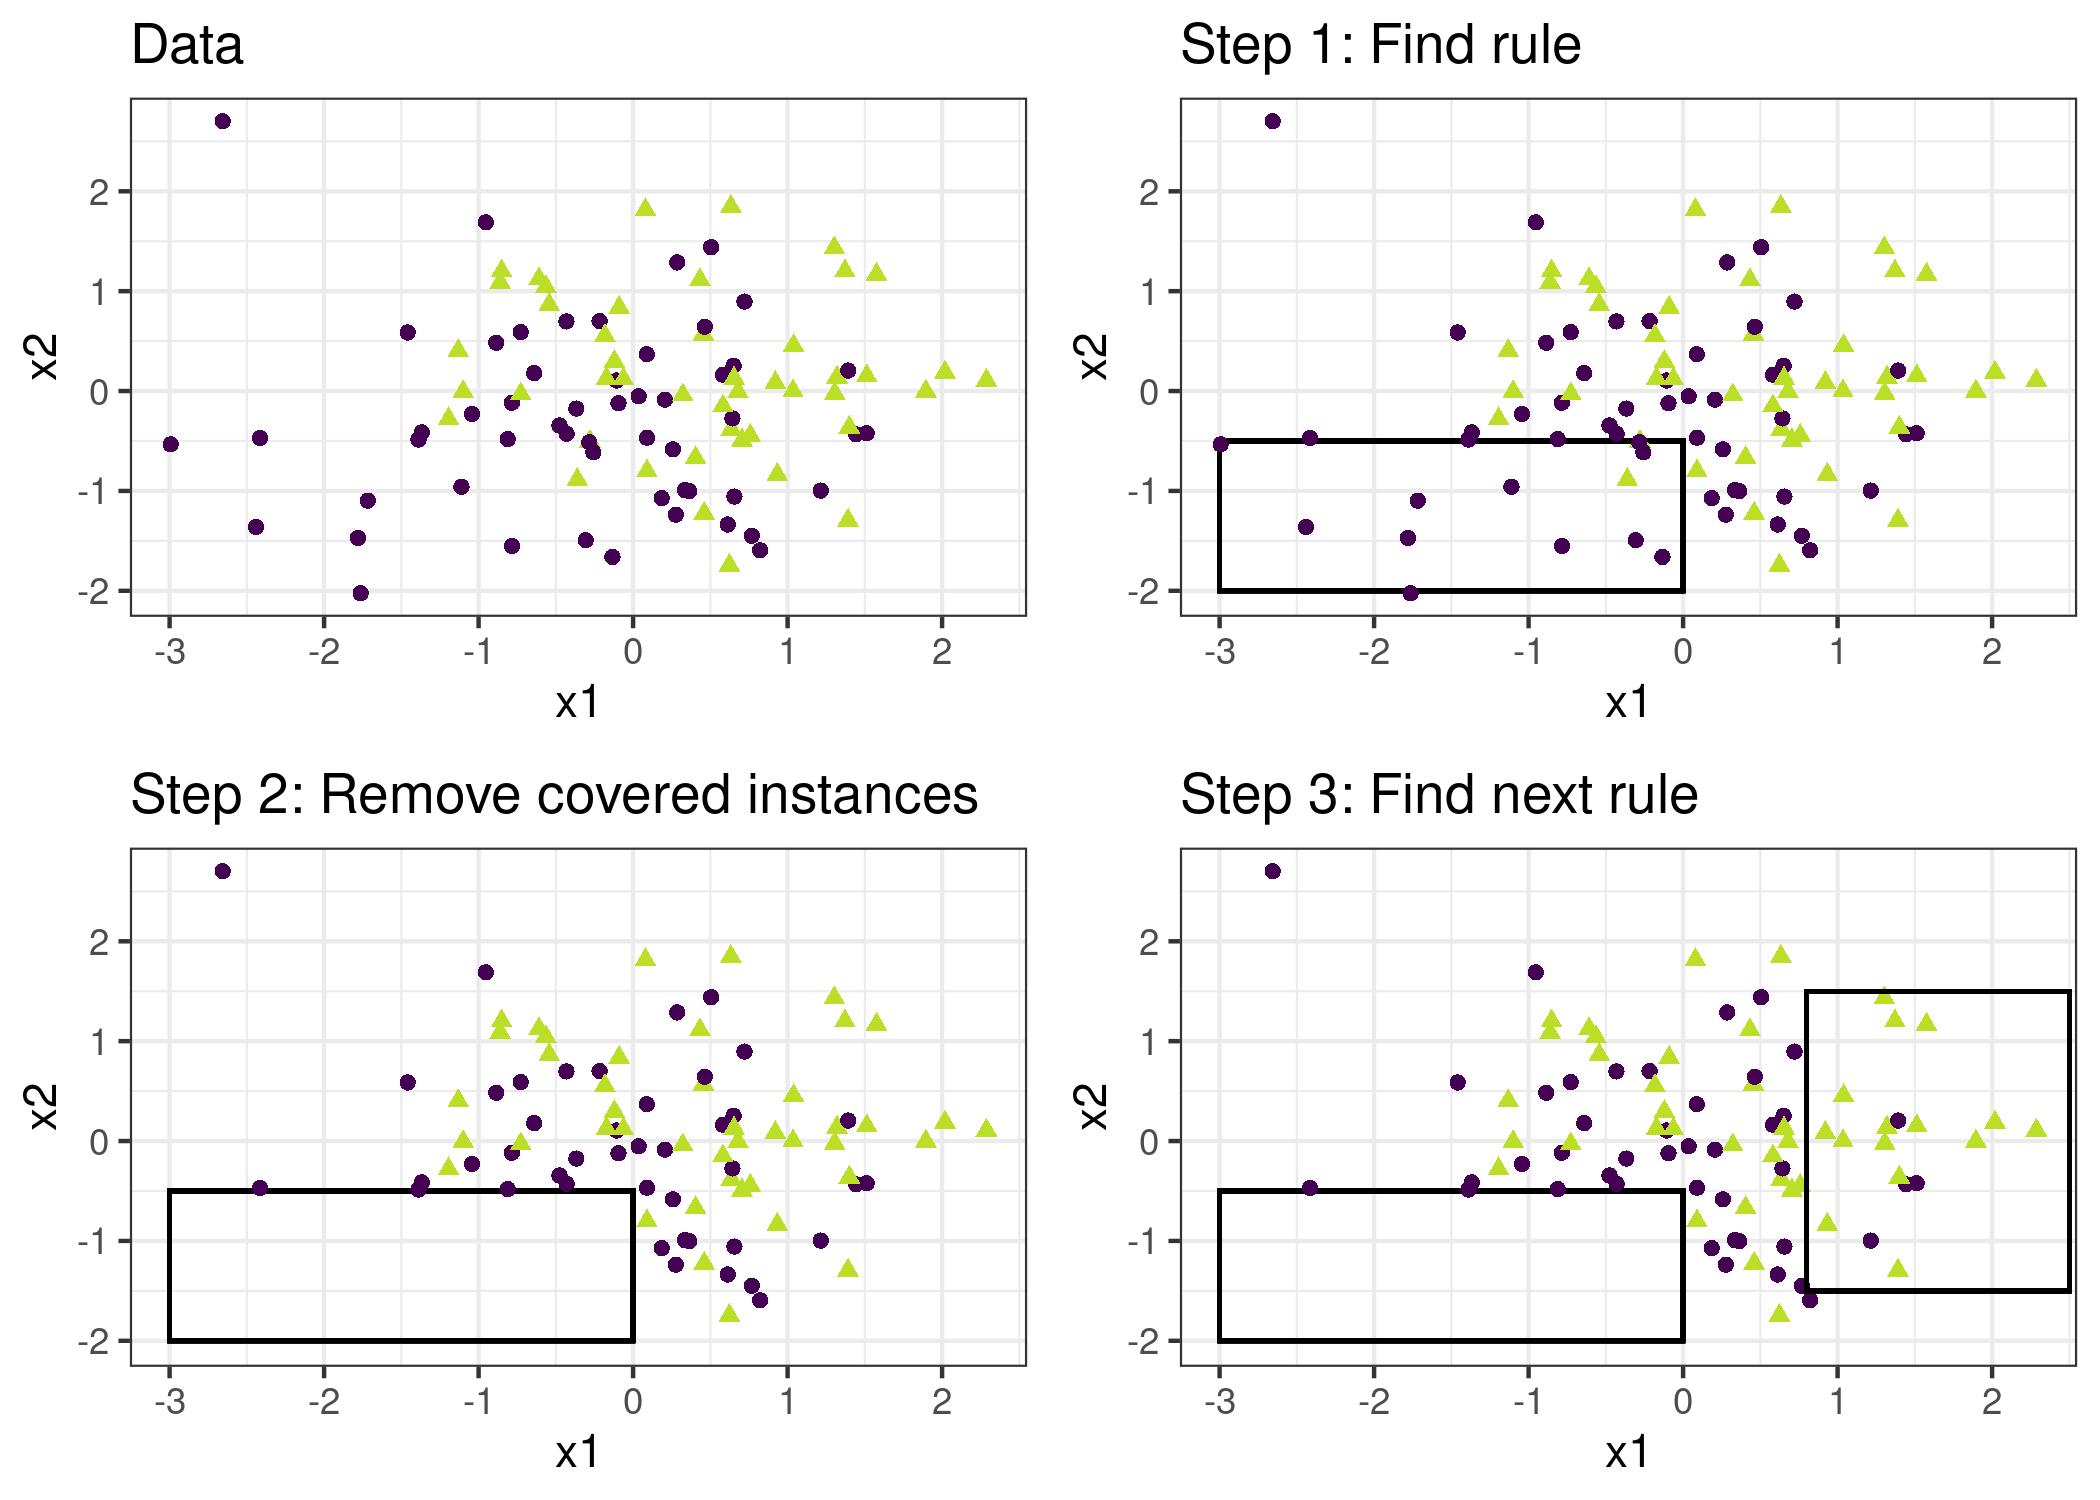 The covering algorithm works by sequentially covering the feature space with single rules and removing the data points that are already covered by those rules. For visualization purposes, the features x1 and x2 are continuous, but most rule learning algorithms require categorical features.